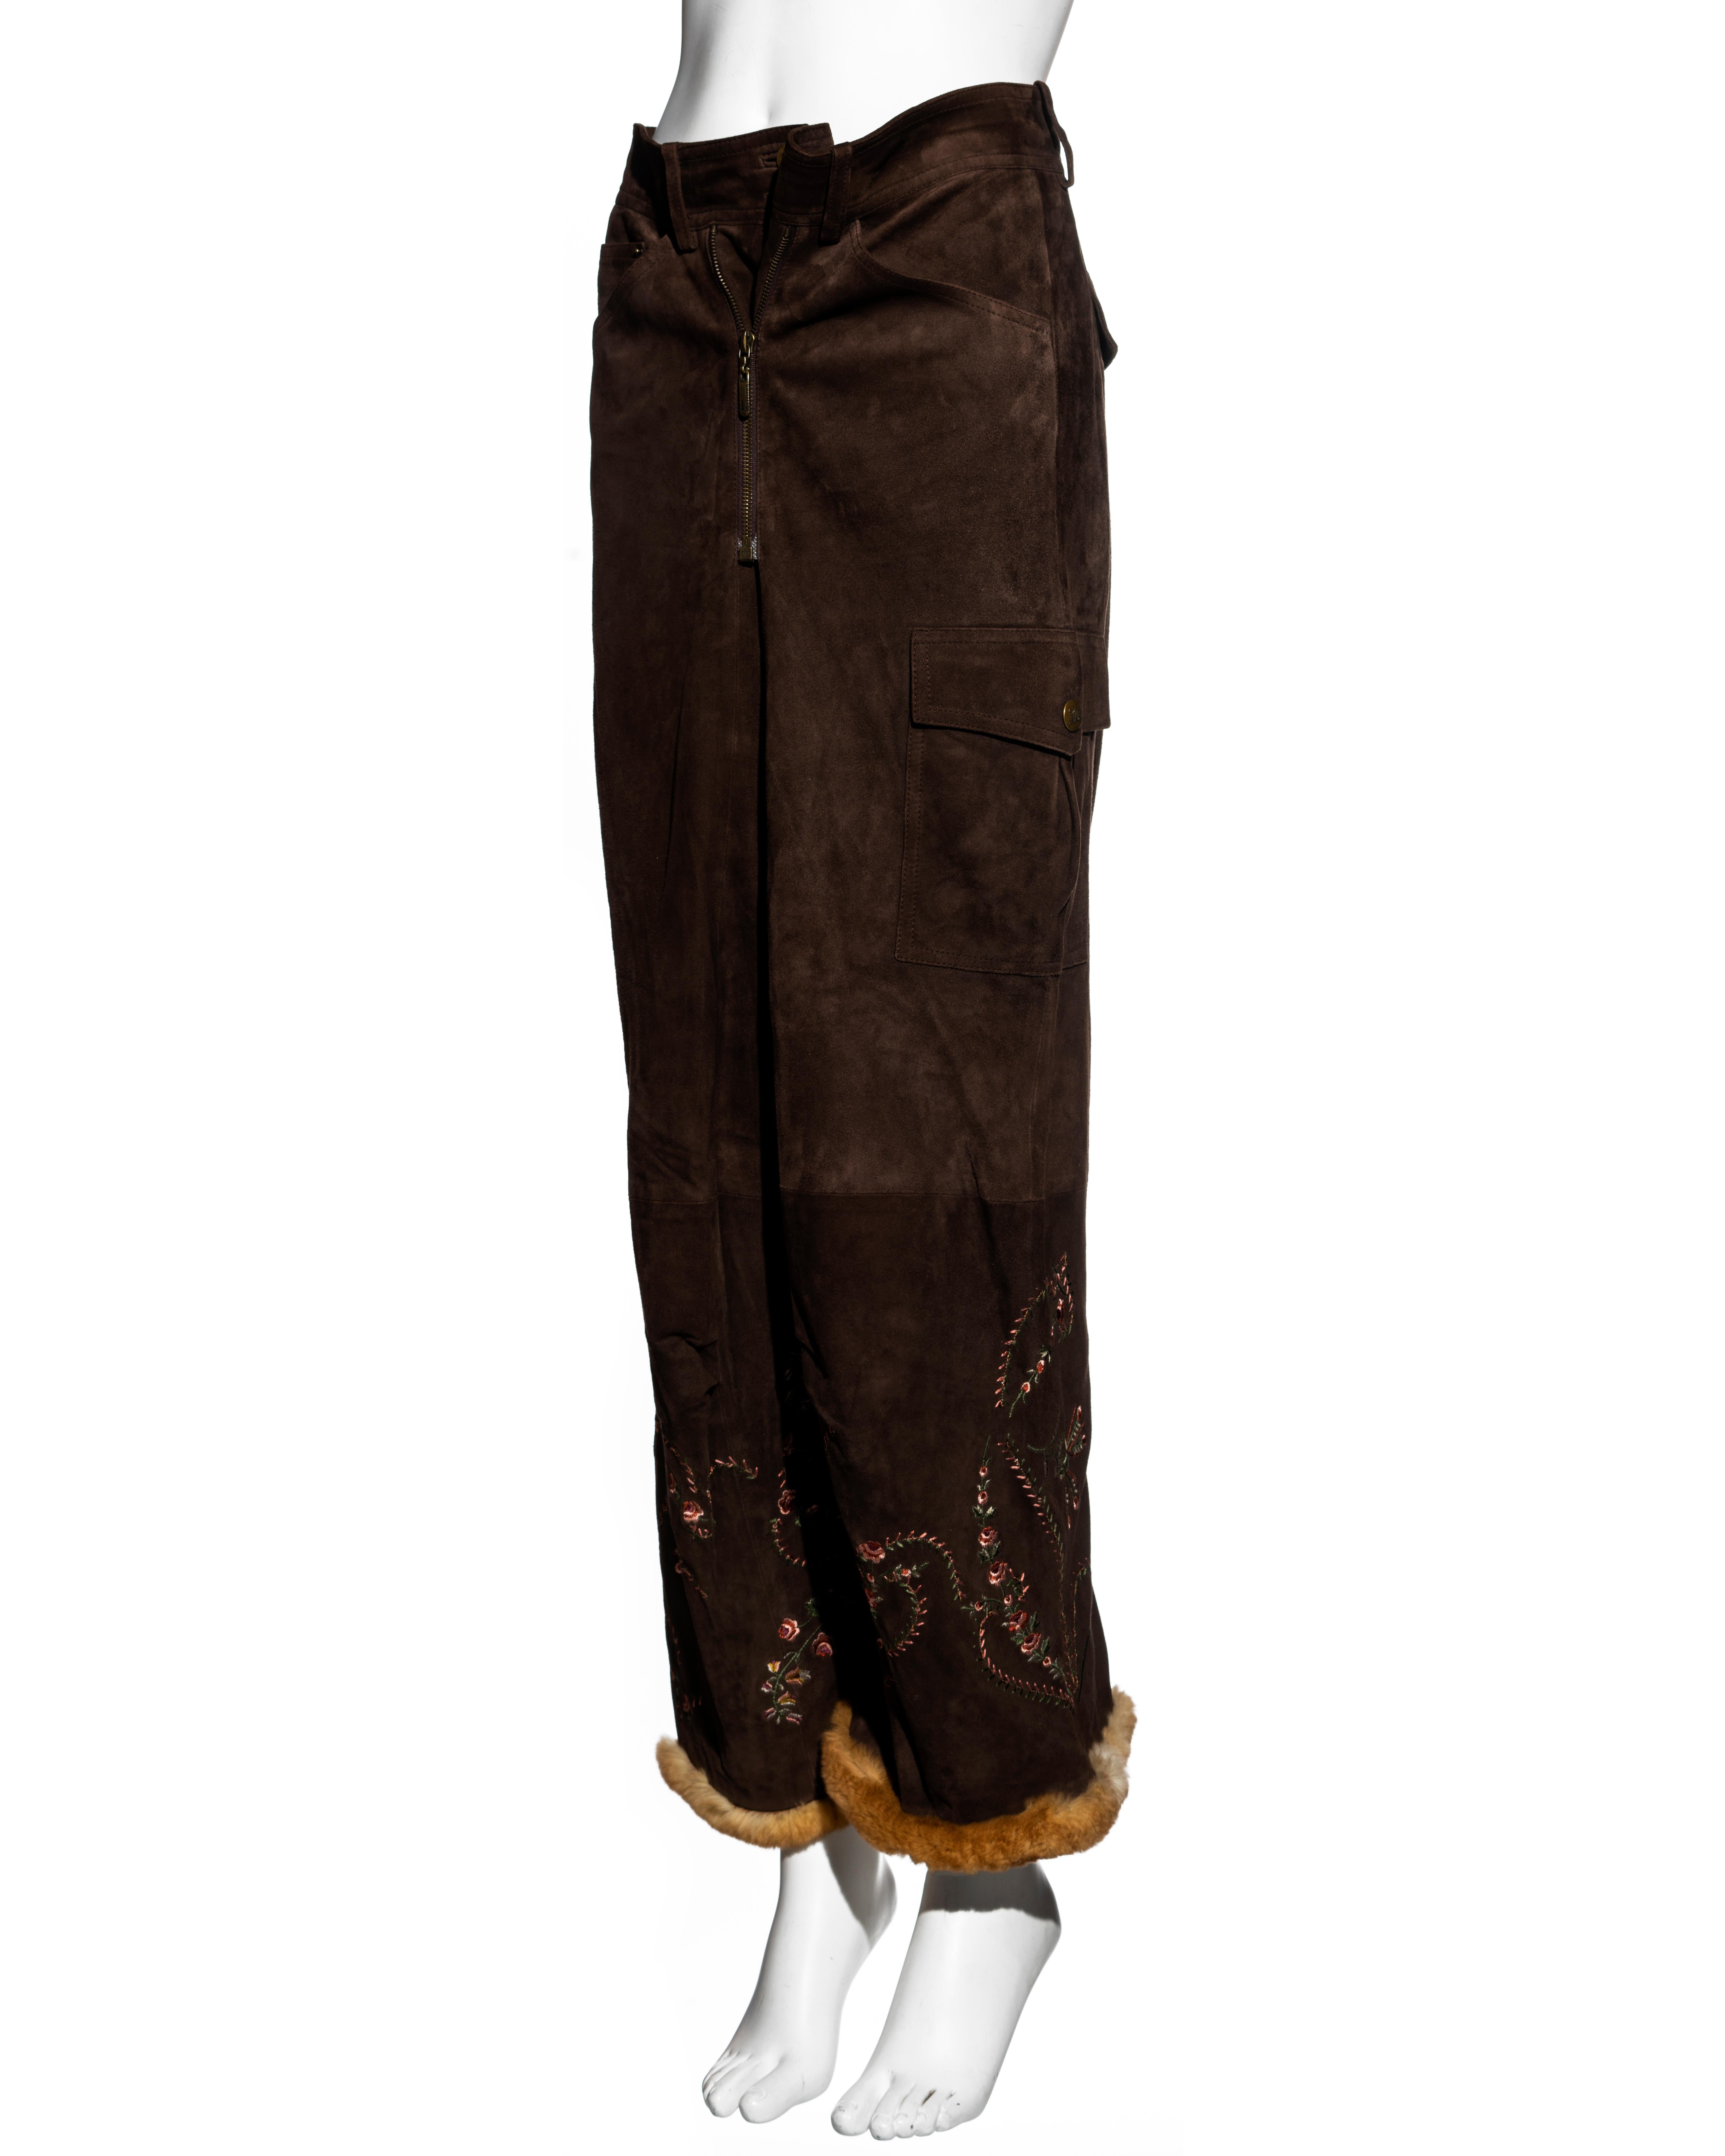 ▪ John Galliano brown suede cargo pants 
▪ Curved-leg
▪ Pink floral embroidery 
▪ Orliag fur trim at the hem 
▪ Double zip fastening with the option to style as low or high waisted
▪ Cargo pockets 
▪ Buckle fastening at the center-back
▪ Silk lining